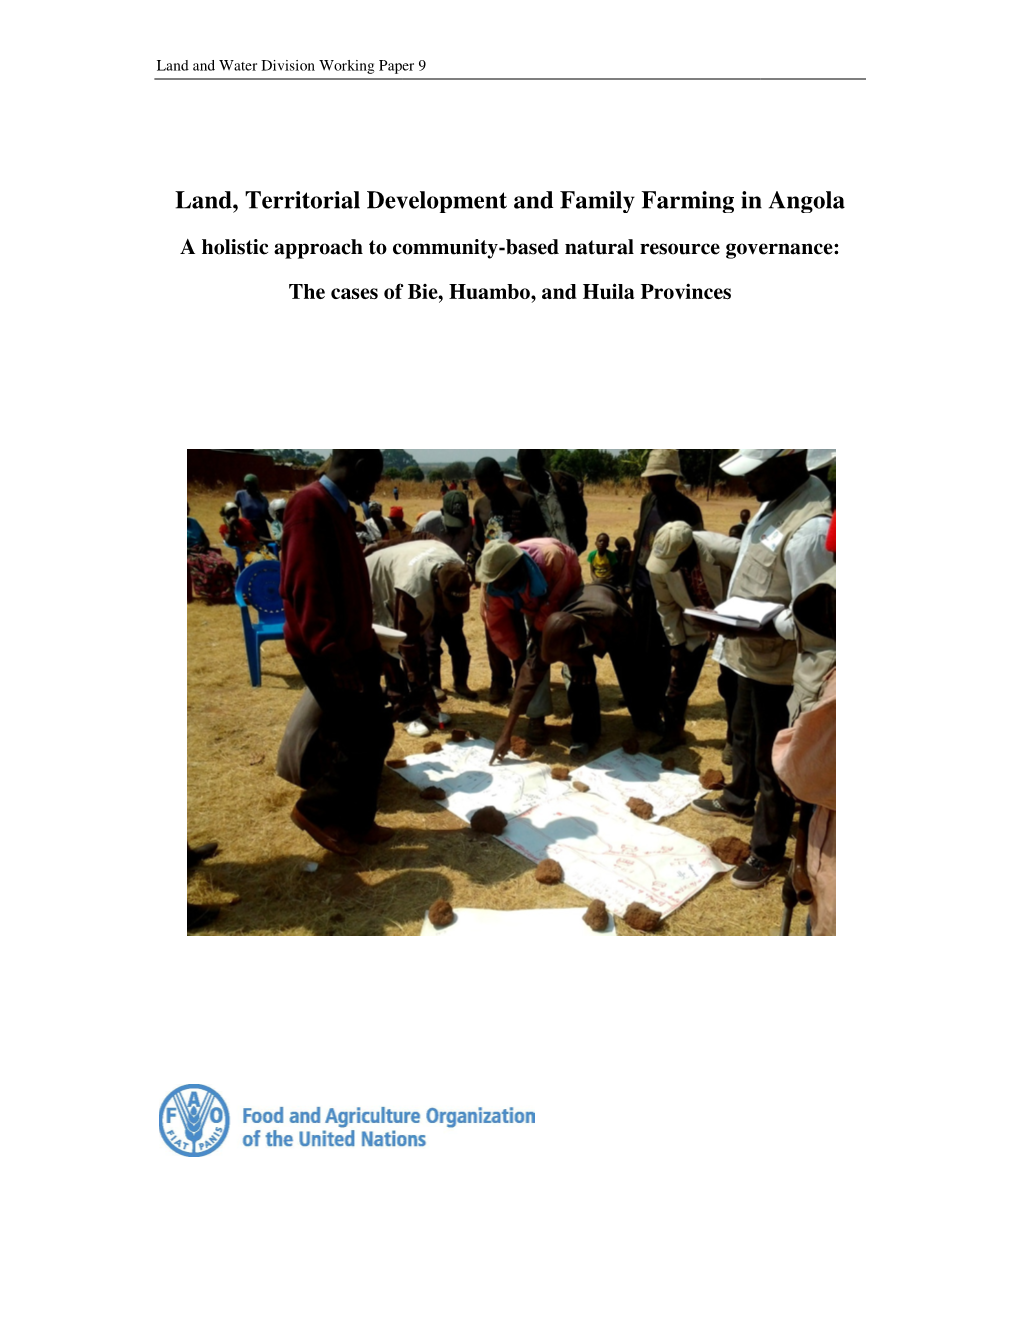 Land, Territorial Development and Family Farming in Angola